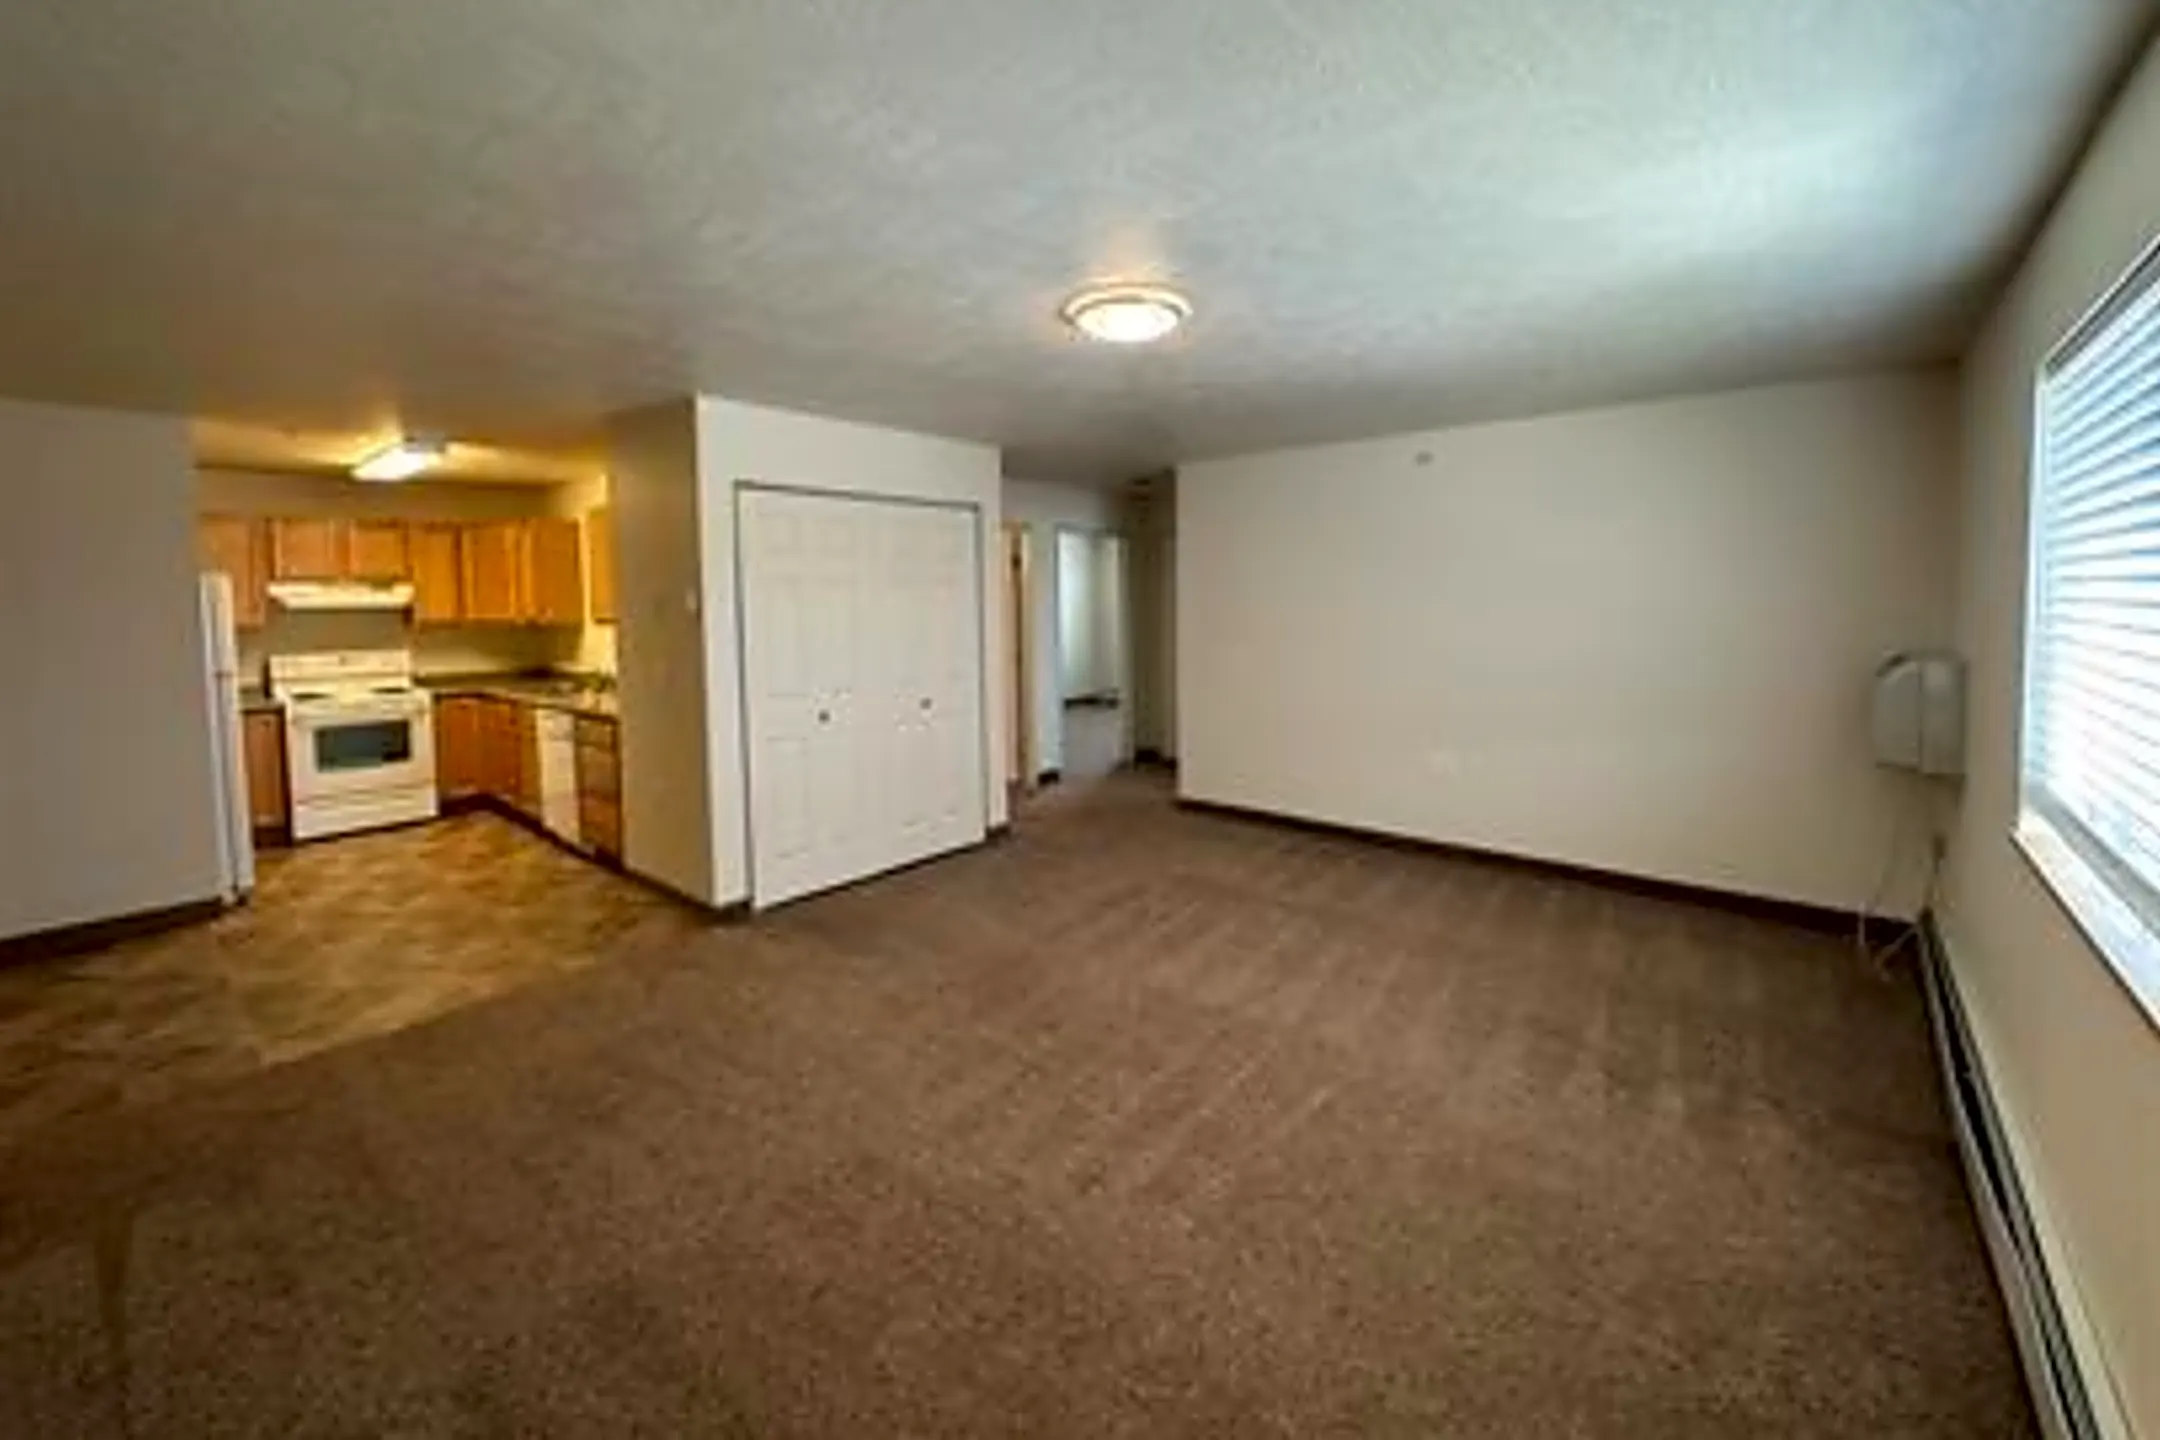 Living Room - 5100 4th Ave N - Great Falls, MT